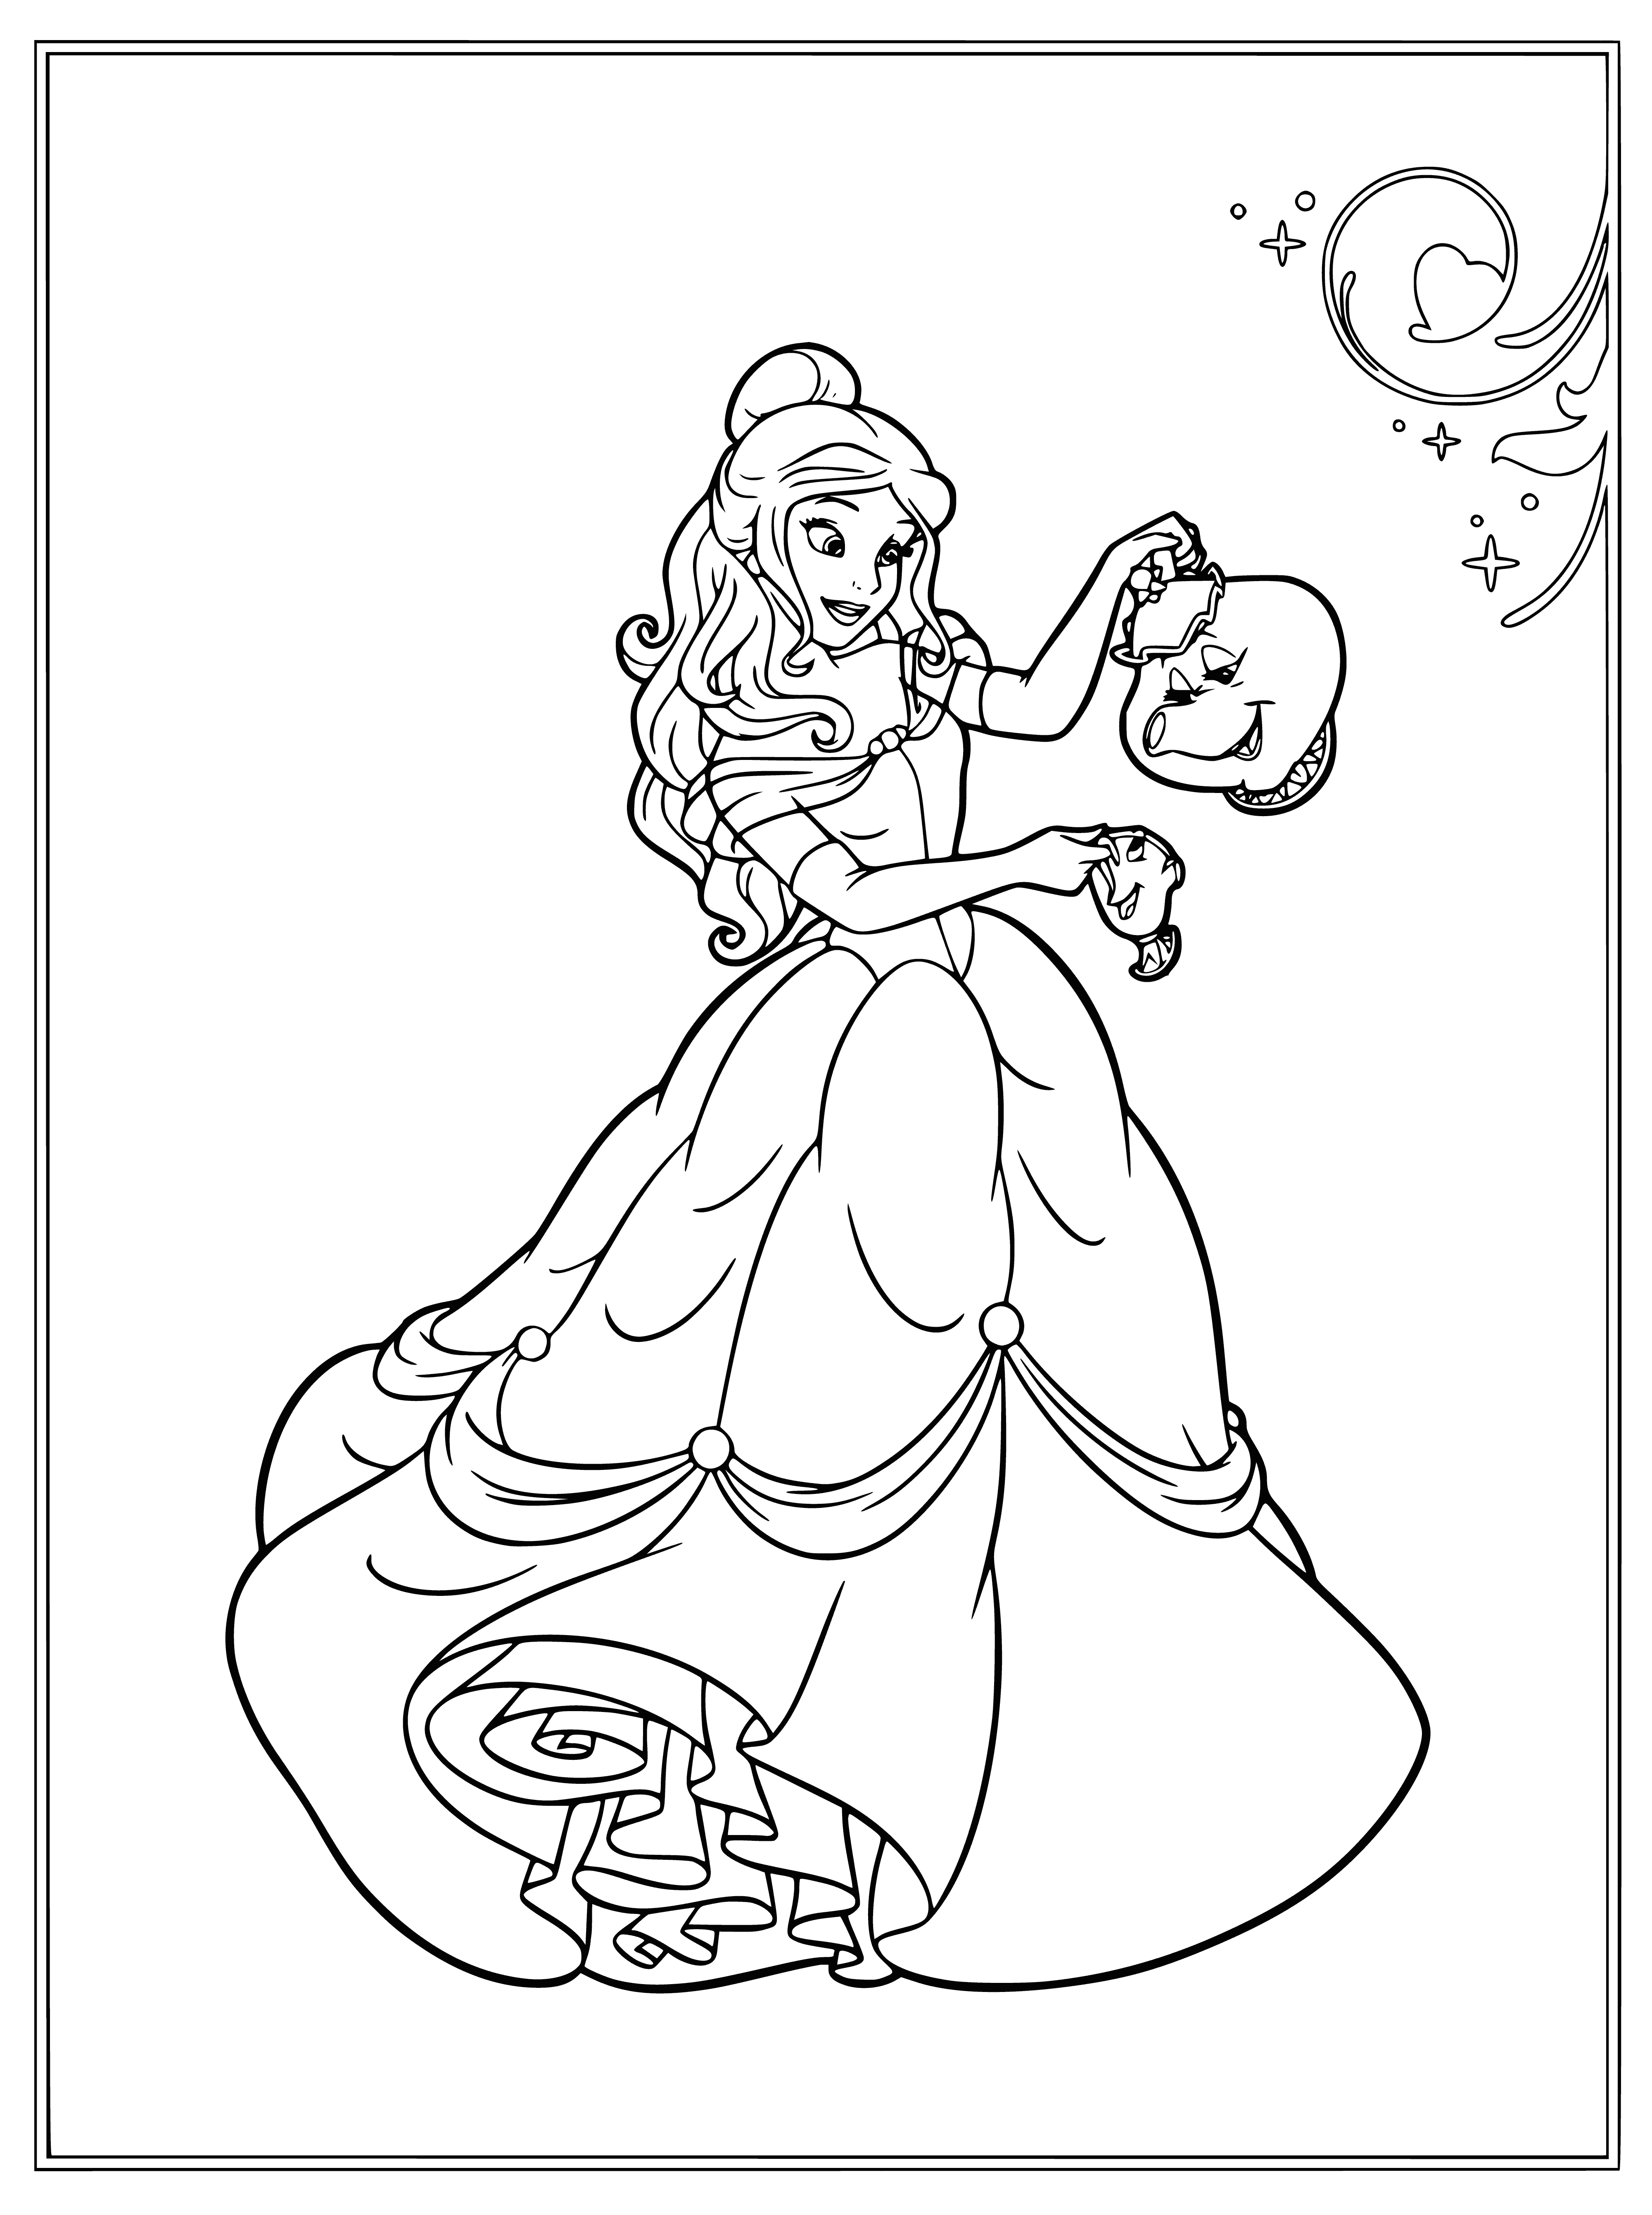 coloring page: Belle is surprised to find the Beast embracing her in the mirror; he looks lovingly at her.